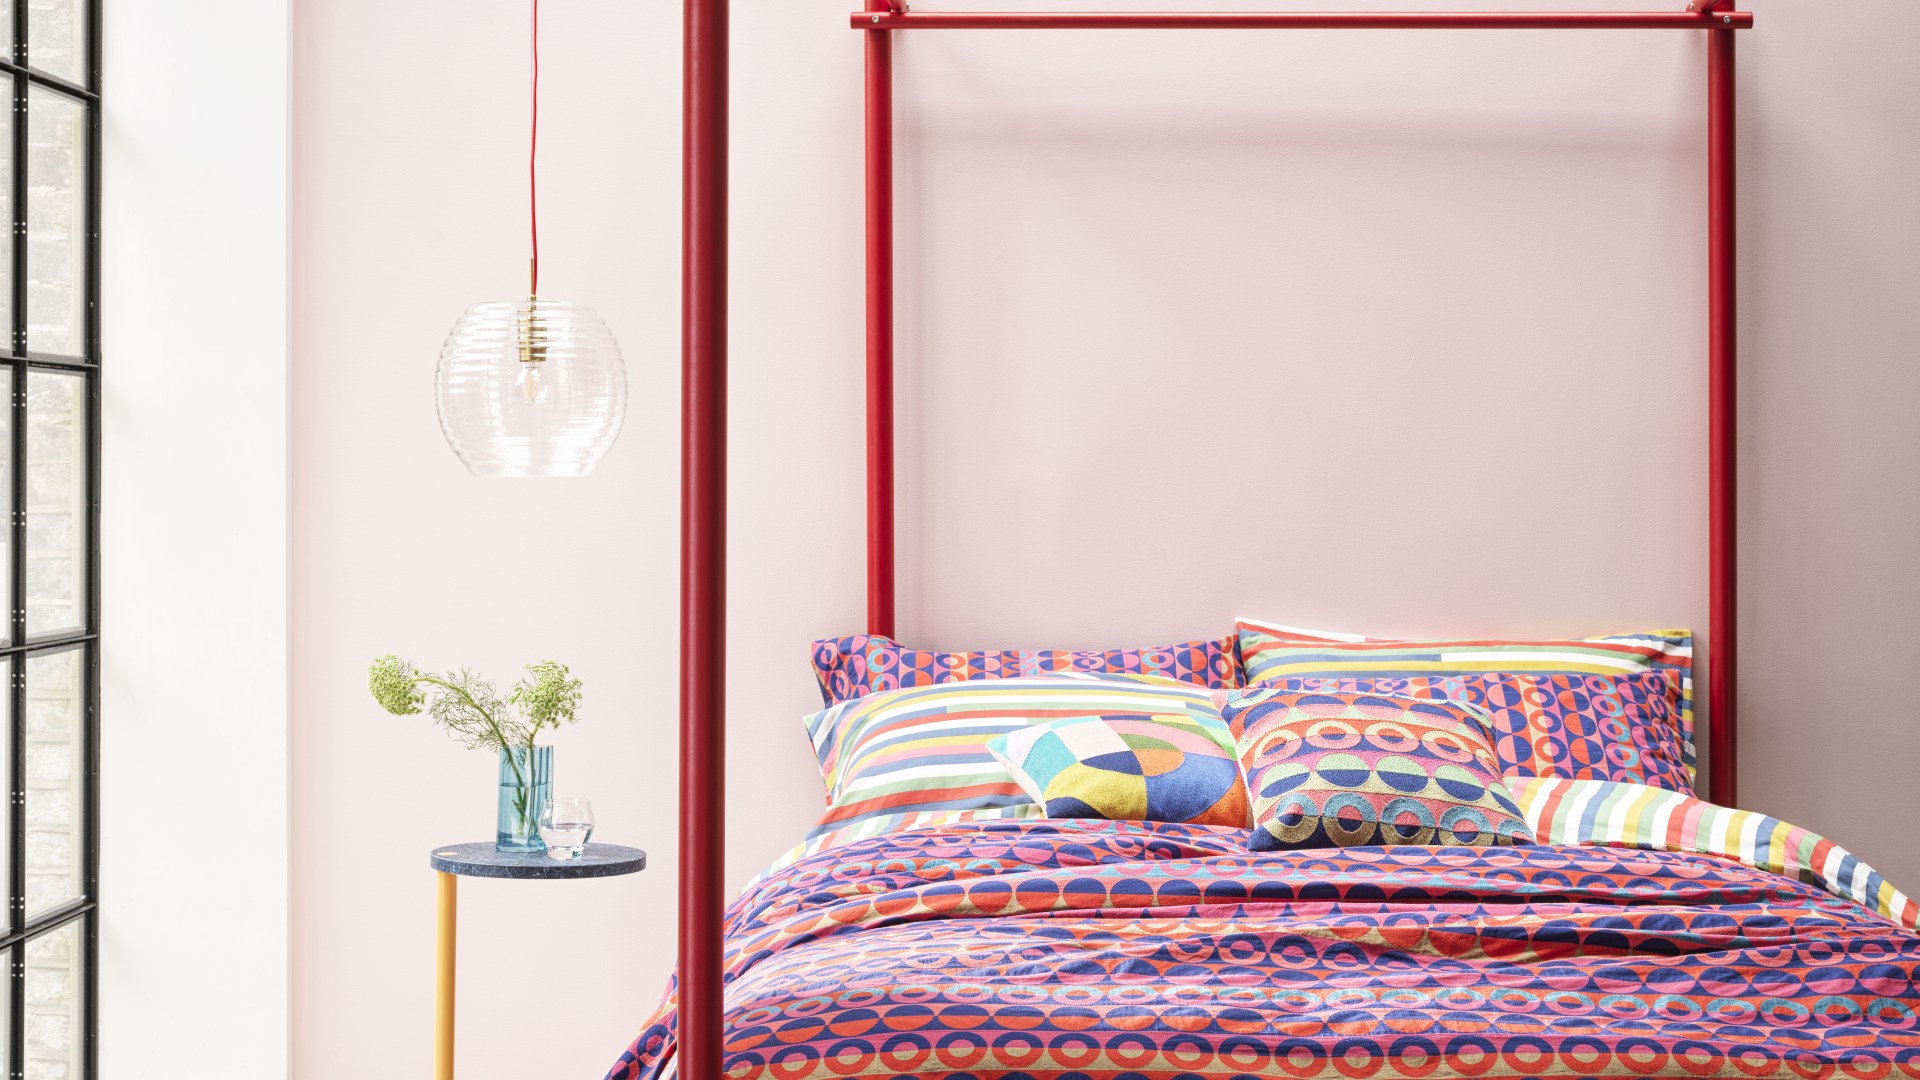 Habitat gives us all happy returns with its 60th anniversary collection of must-have homeware [Video]